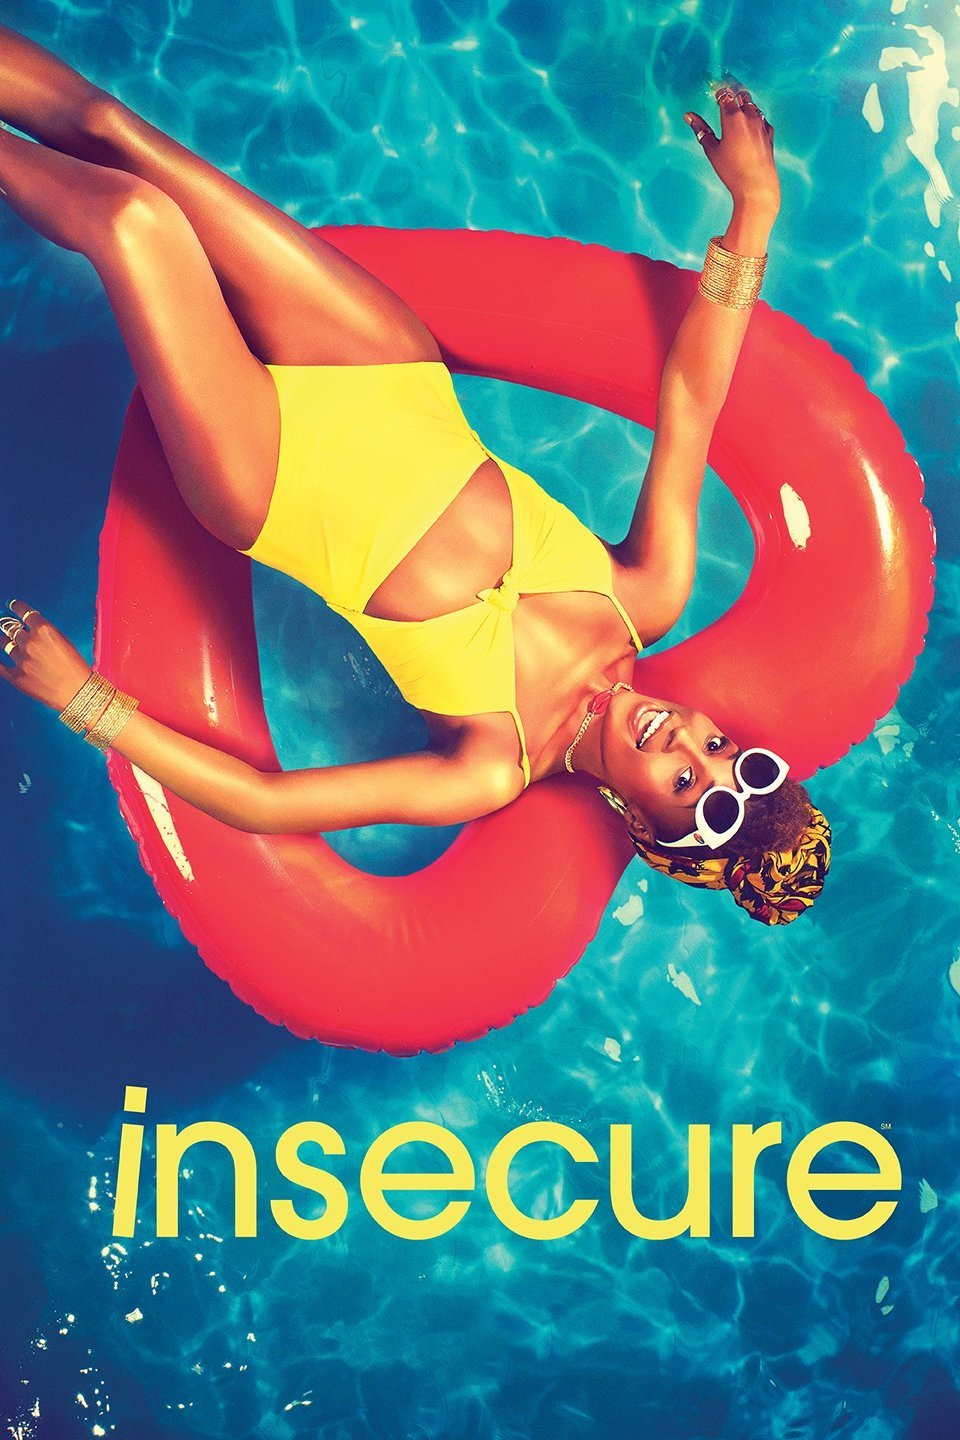 Insecure 2016 - Full (HD)